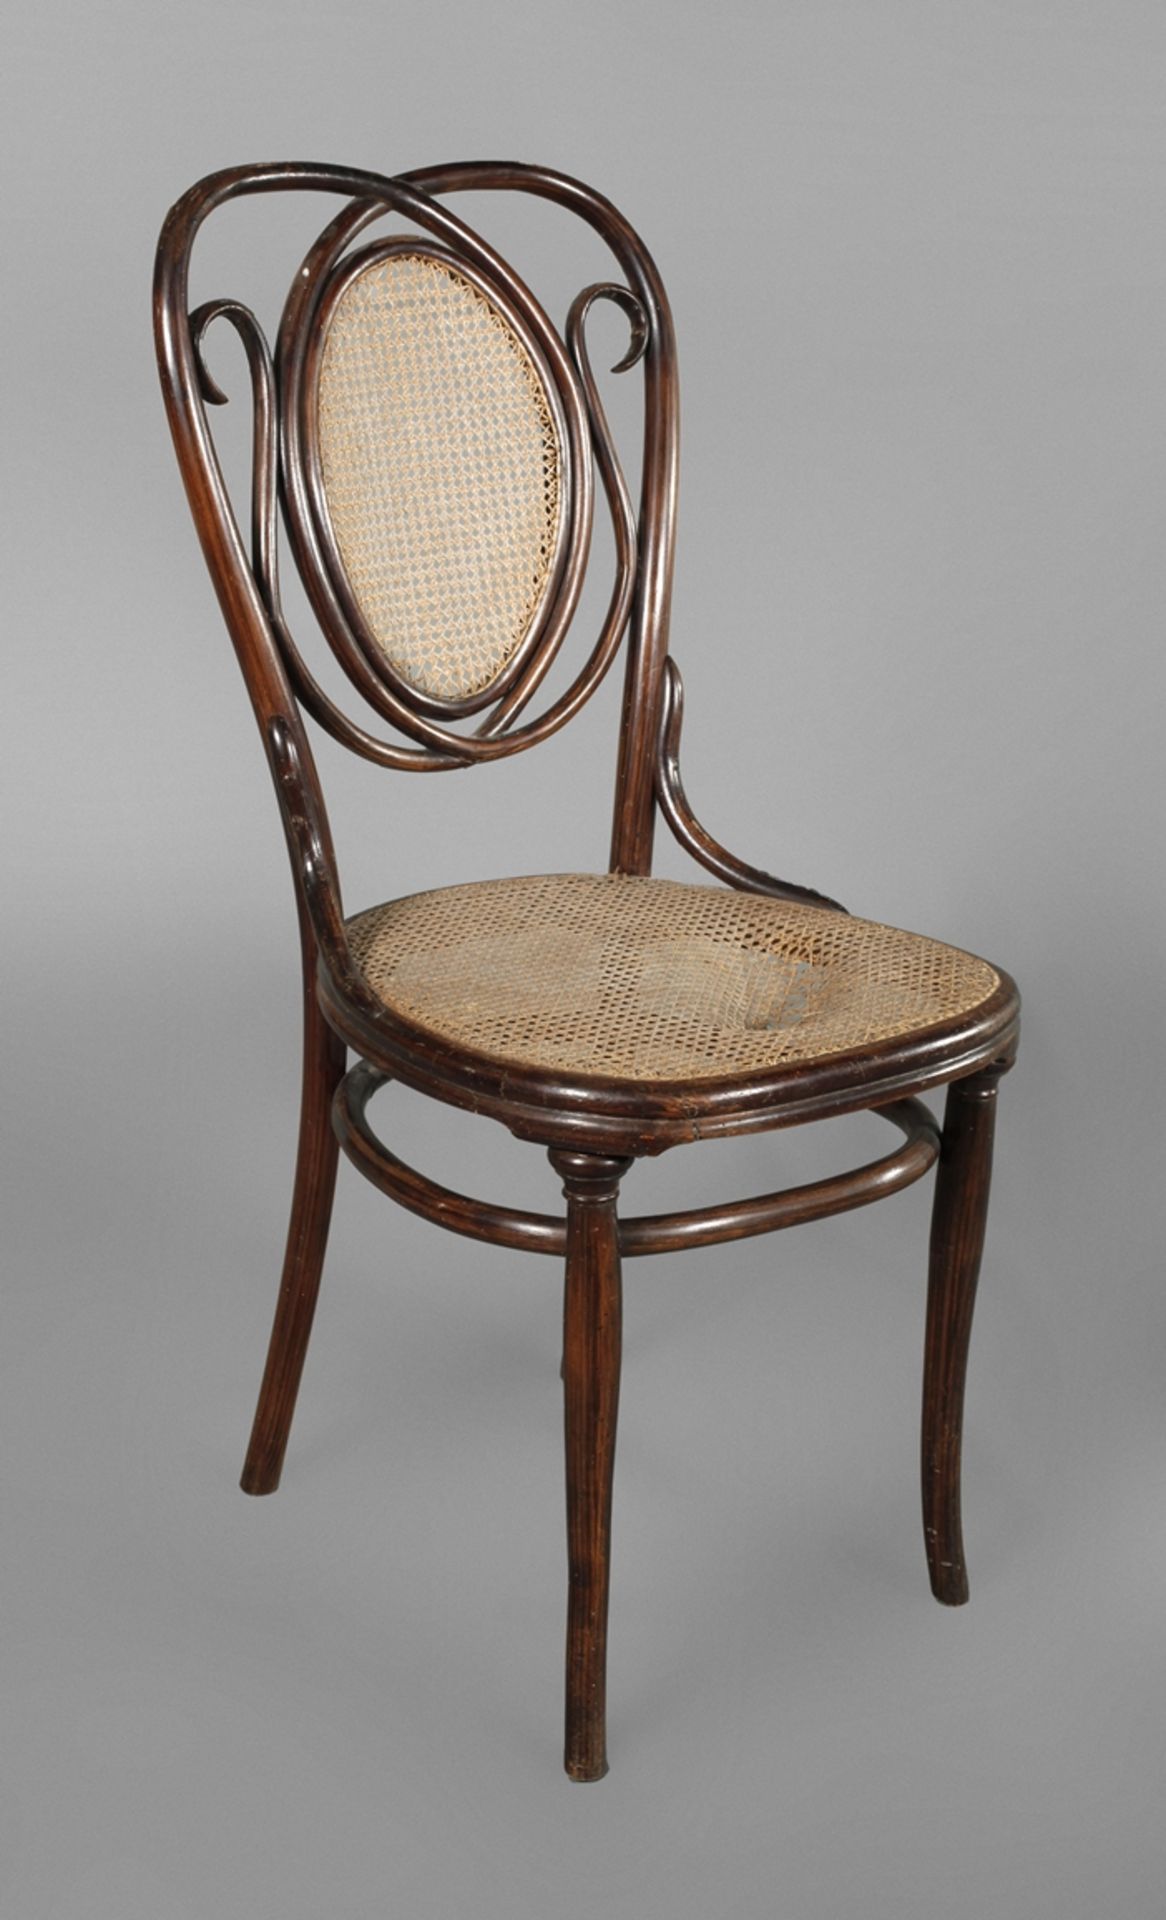 Early Thonet chair, model no. 22